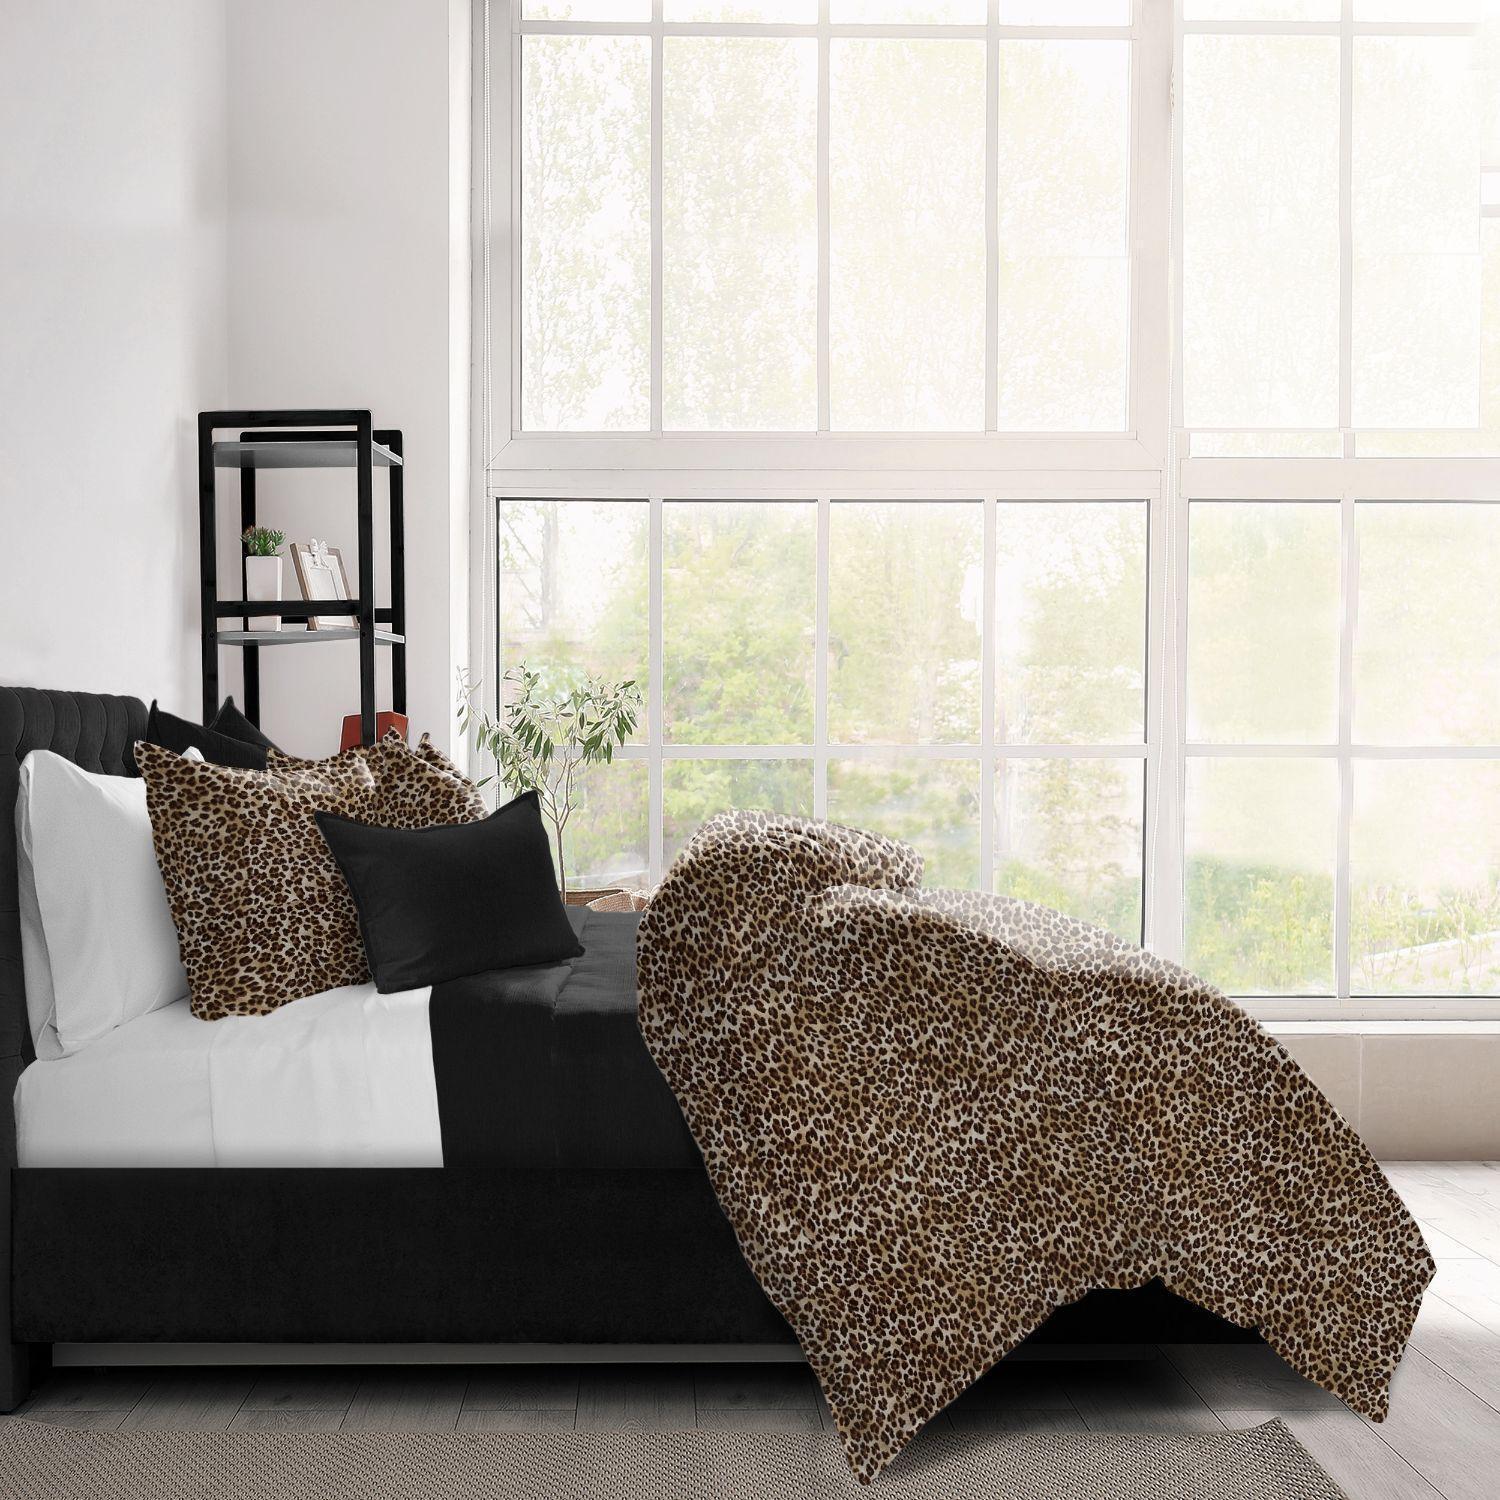 Set of 3 Black and Brown Leopard Print Comforter with Pillow Shams - Queen Size alternate image